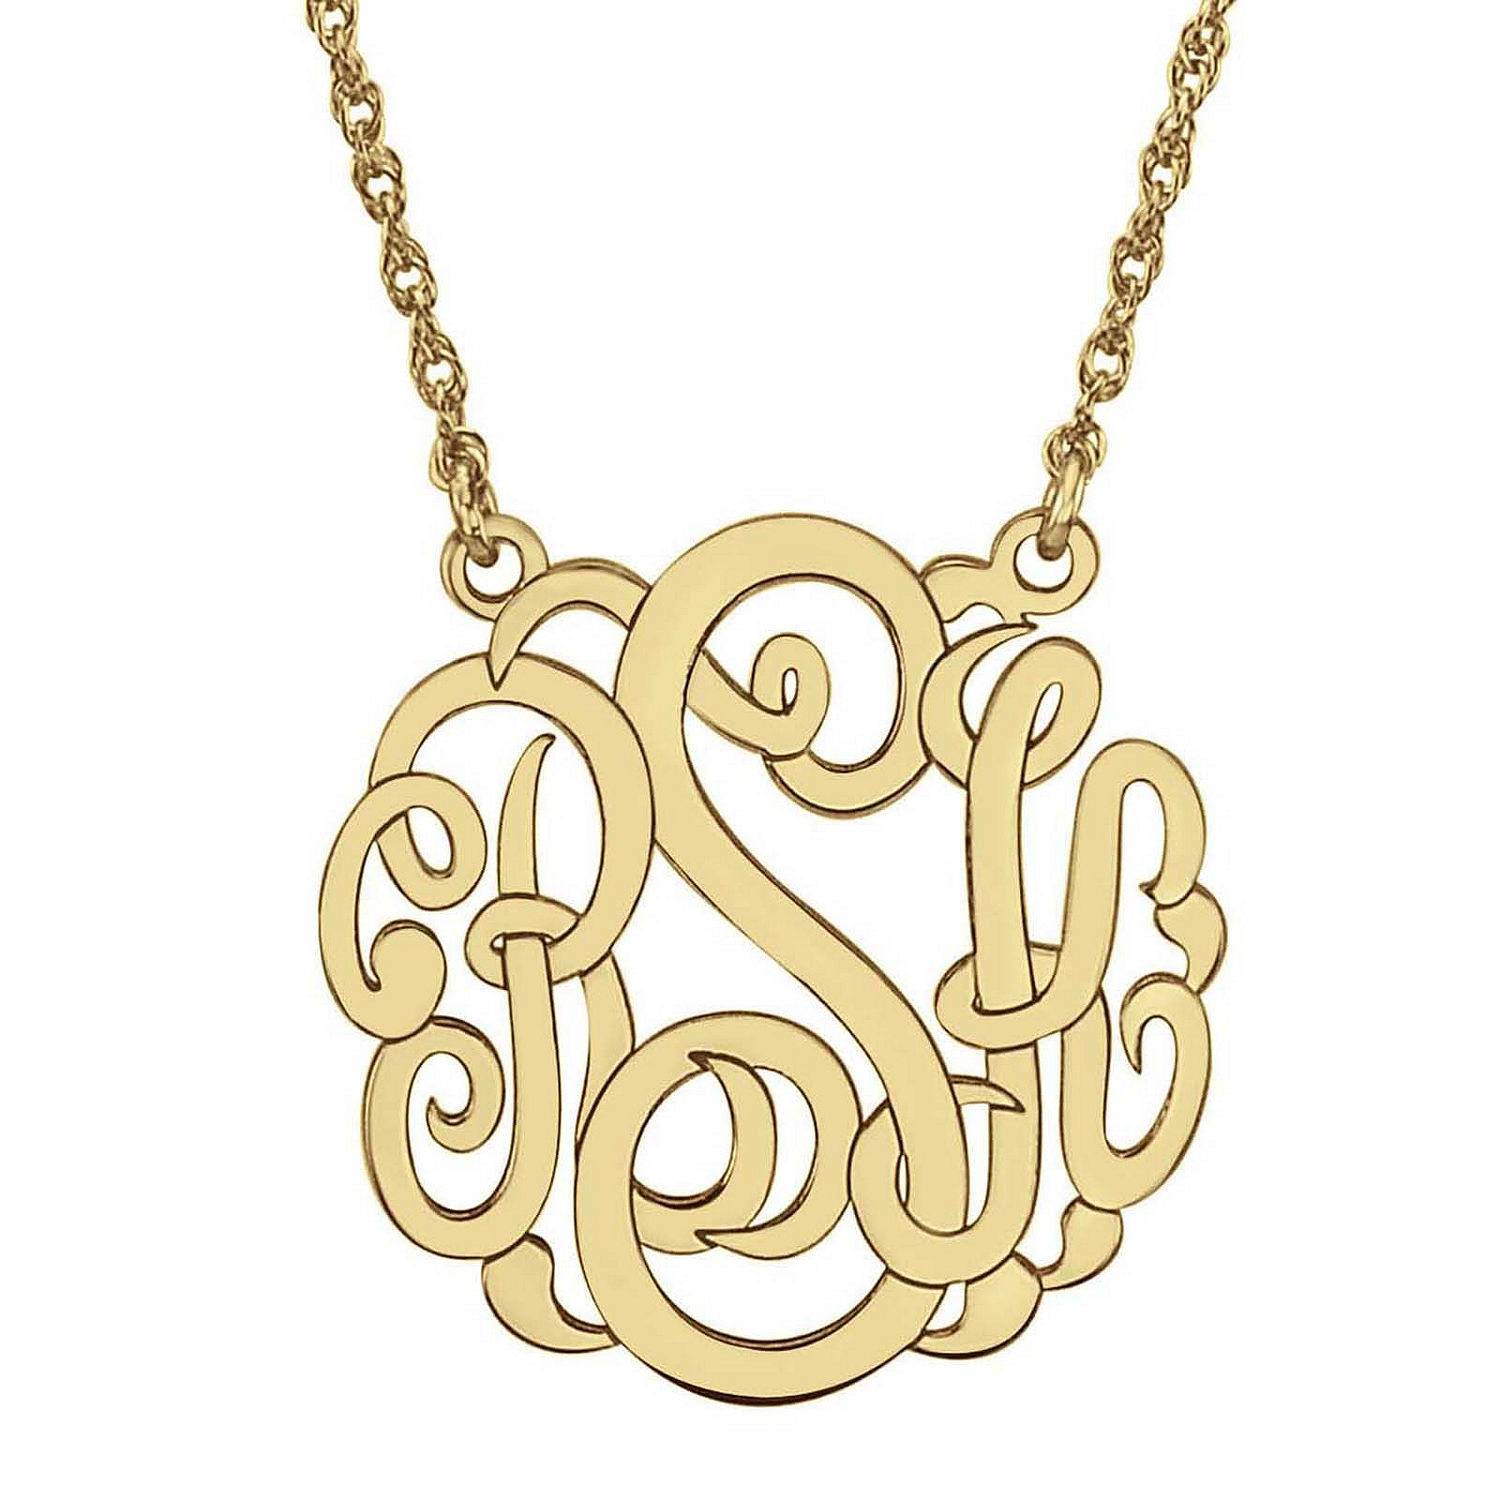 Personalized 14K Gold Over Sterling Silver 25mm Monogram Necklace ...